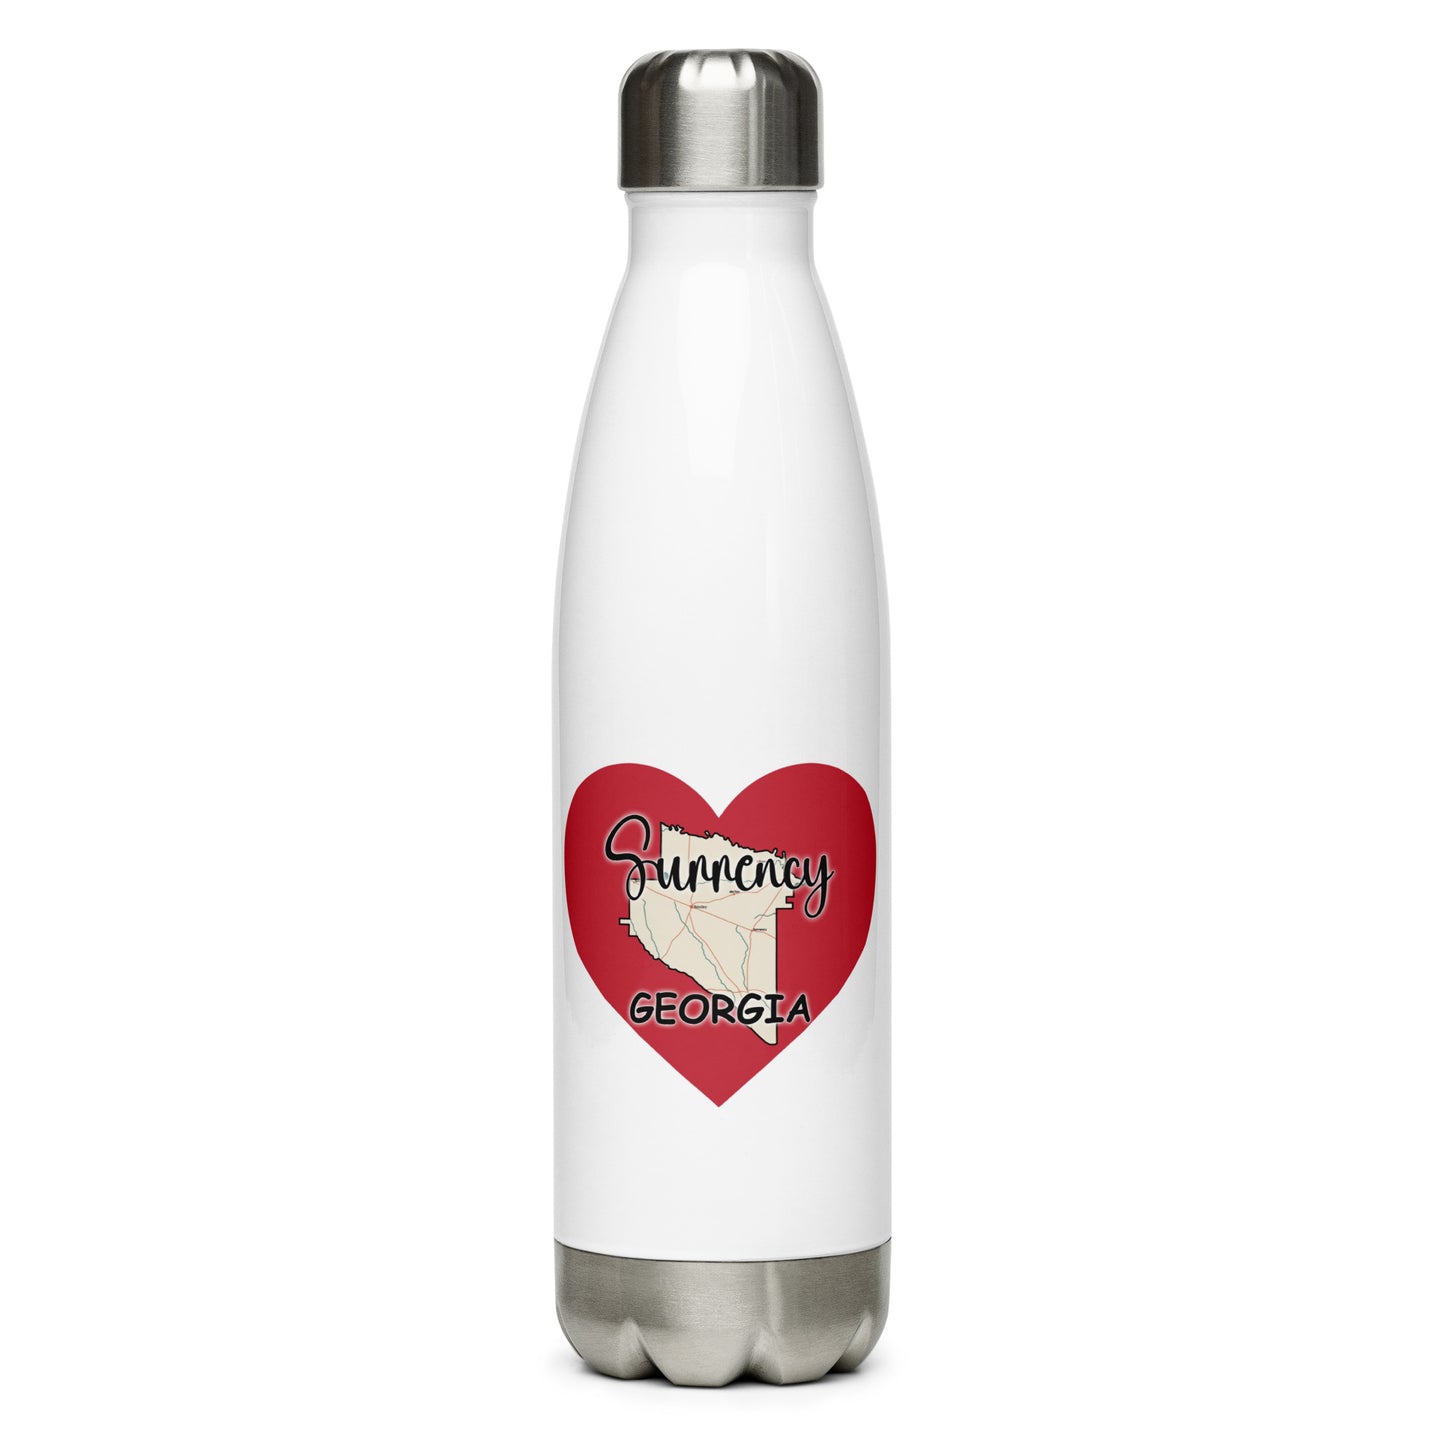 Surrency Georgia County on Large Heart Stainless Steel Water Bottle 17 oz (500 ml)